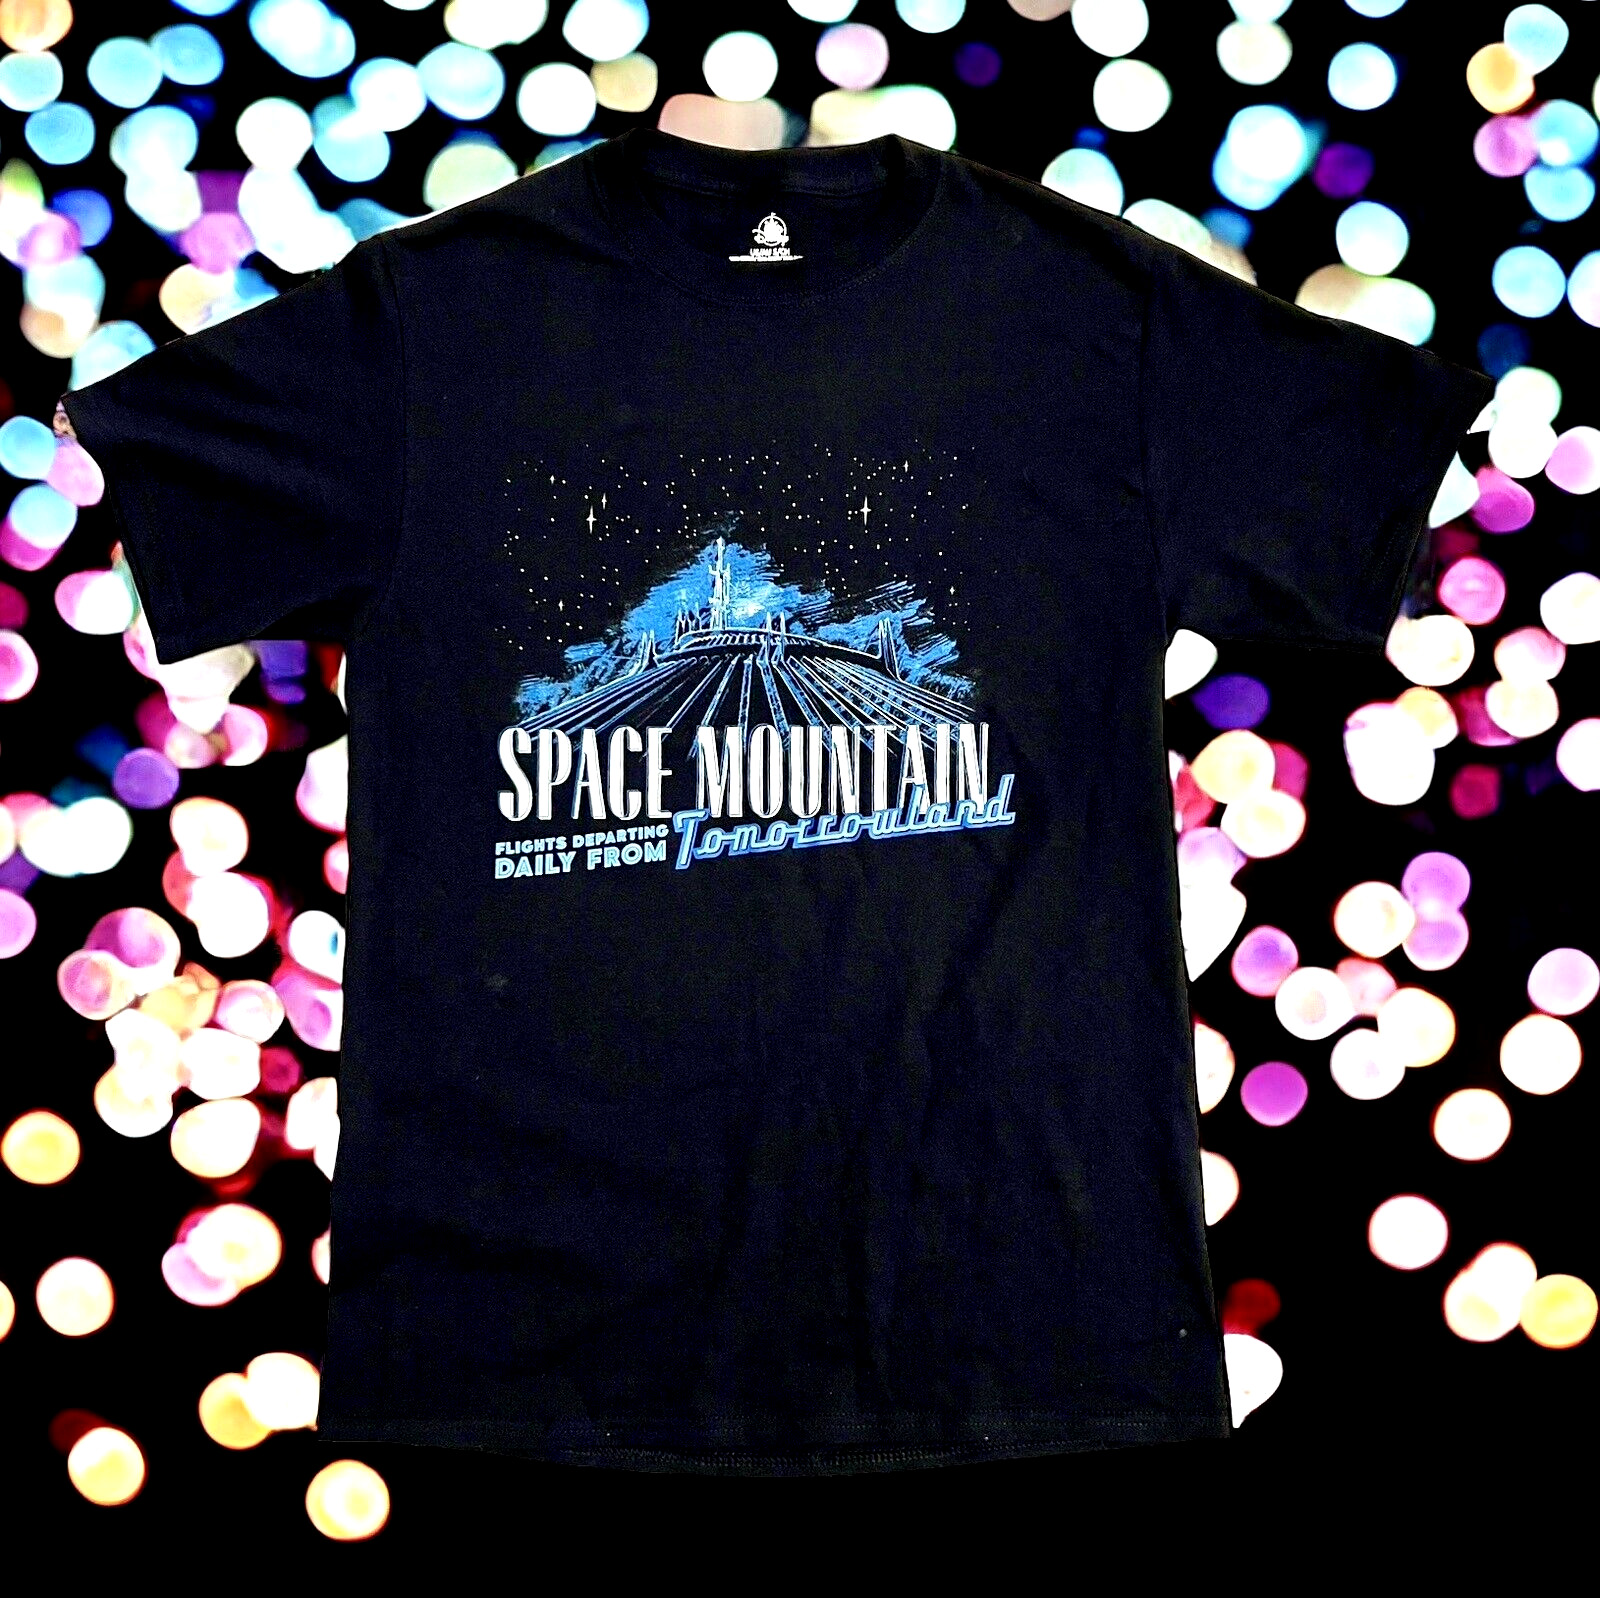 SPACE MOUNTAIN Daily Flights From TOMMOROWLAND DISNEY Theme Park T-Shirt Adult S